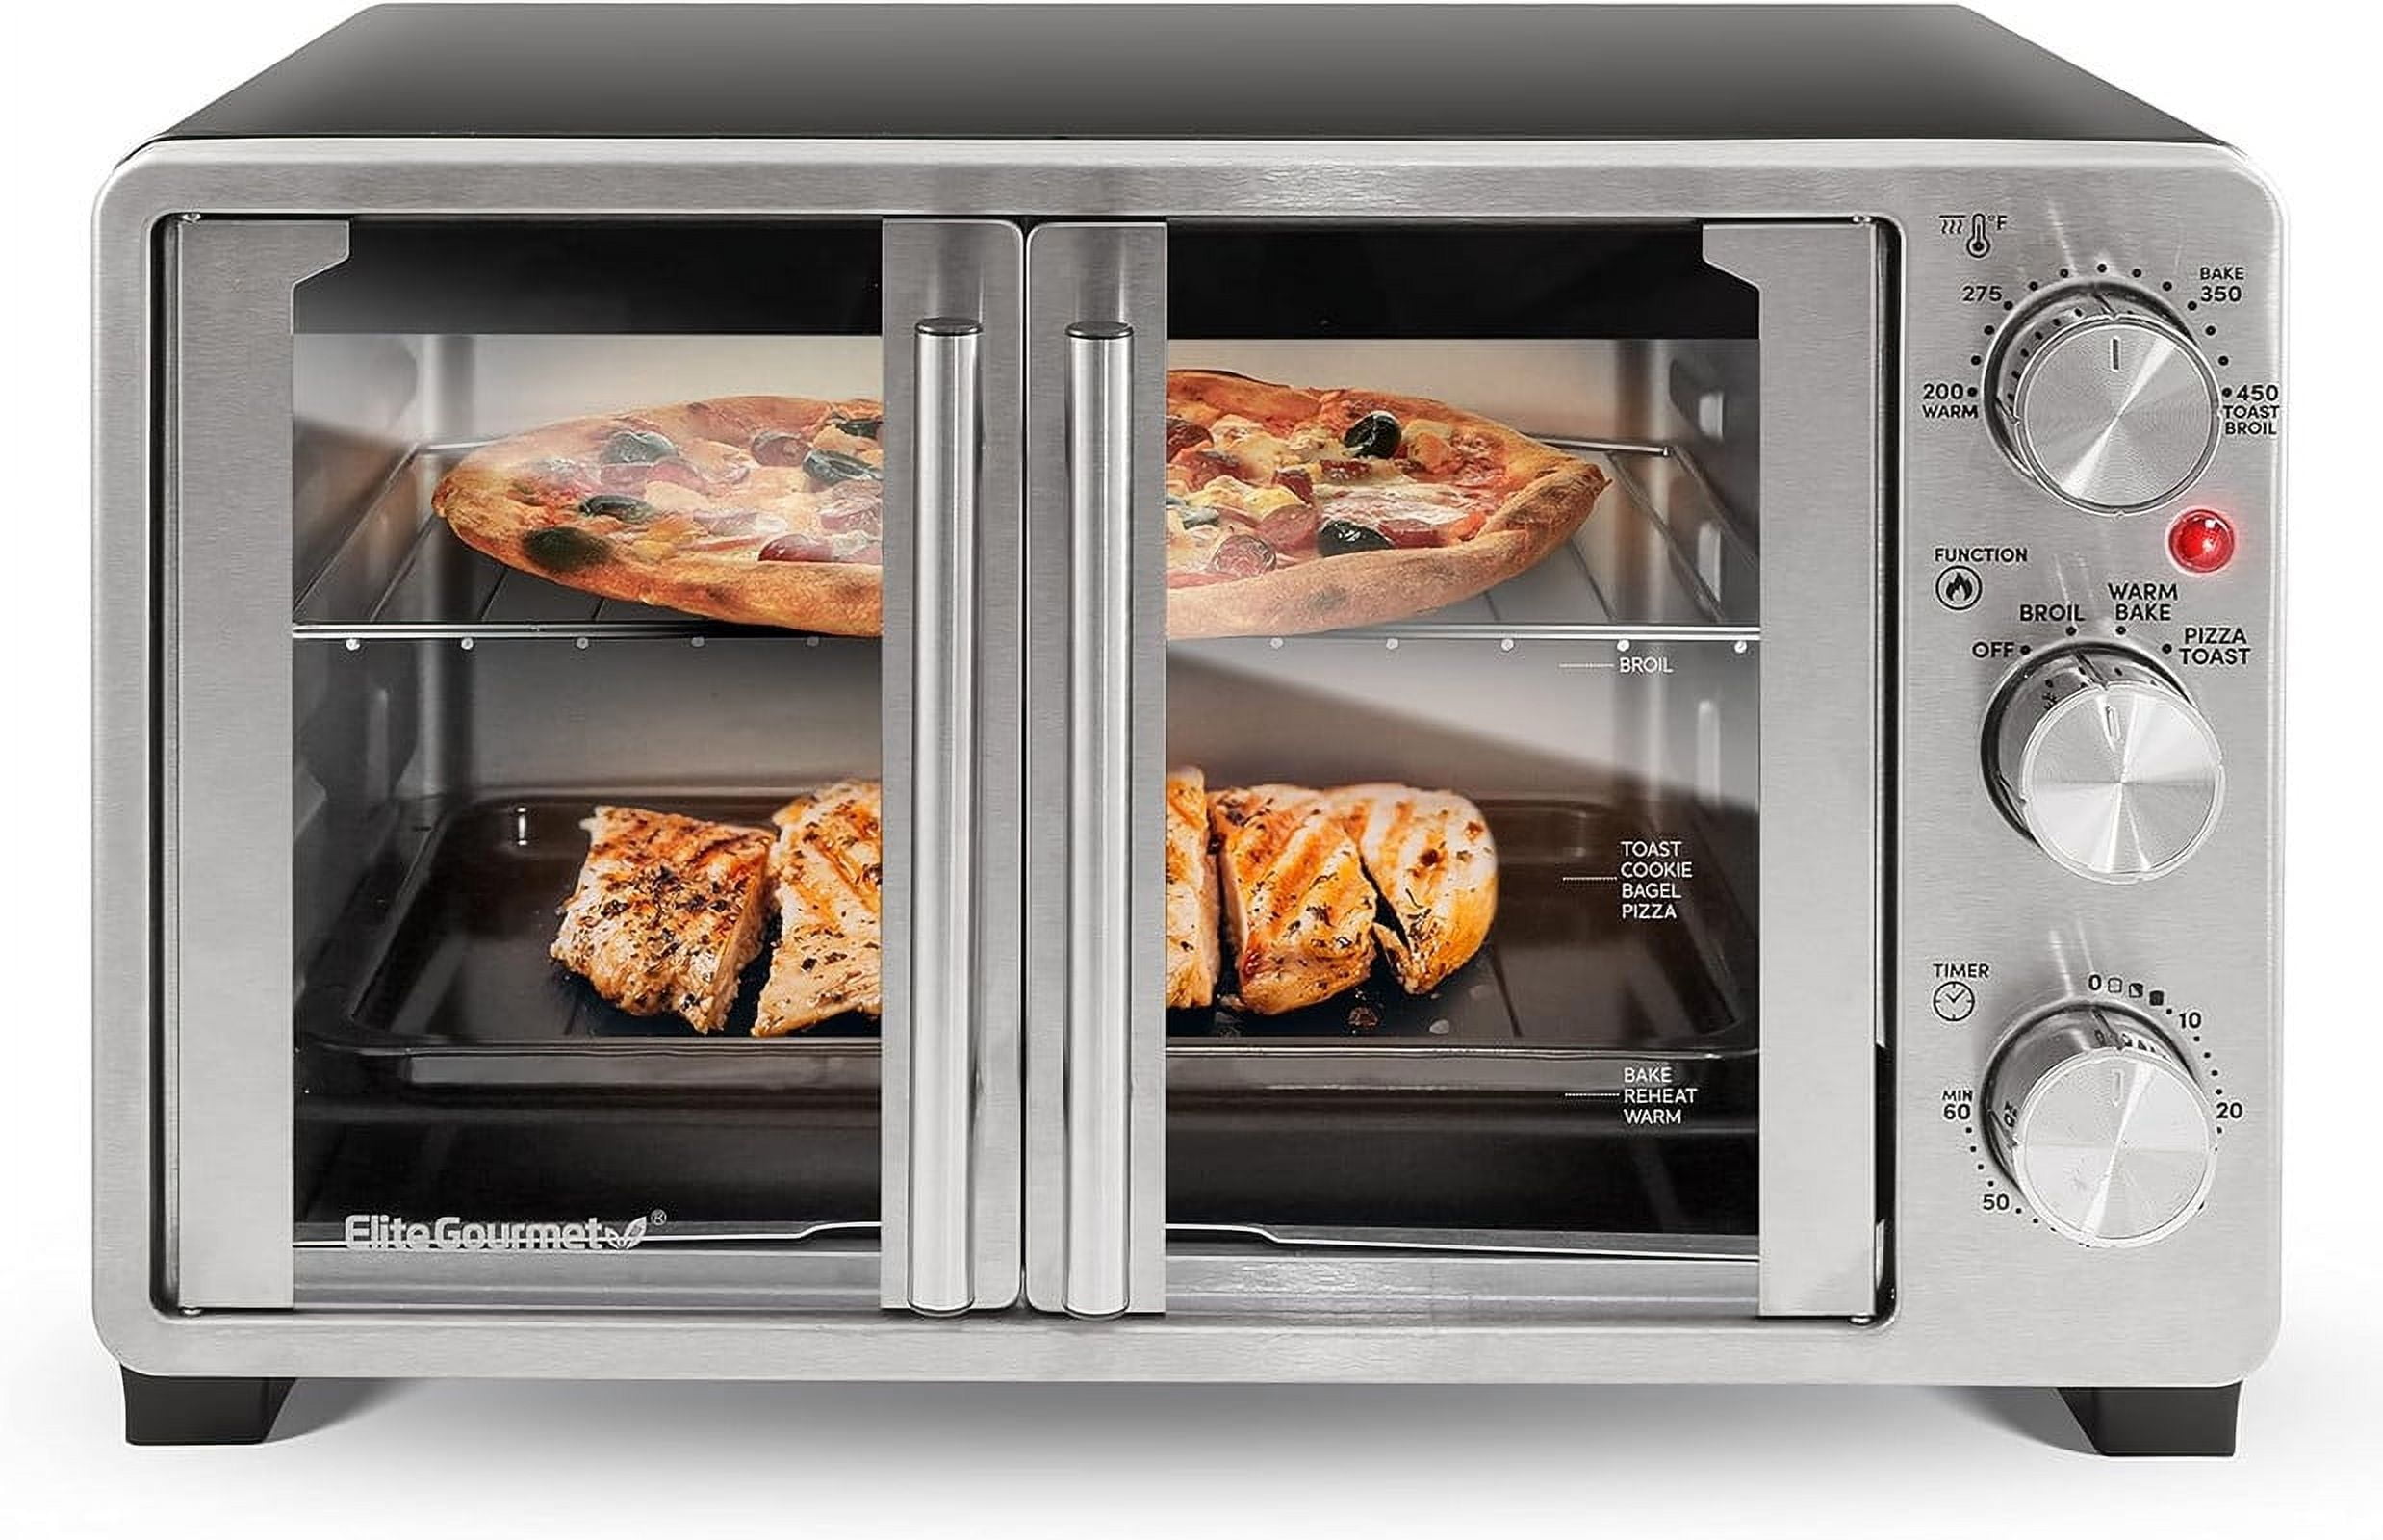  Elite Gourmet EAF1222SS Air Fryer Oven Double French Doors,  Bake, Grill, Roast, Broil, Rotisserie, Toast, Warm, Air Fry, Dehydrate,  1500 Watts, with 25 Recipes, 12L. Capacity, Stainless Steel: Home & Kitchen